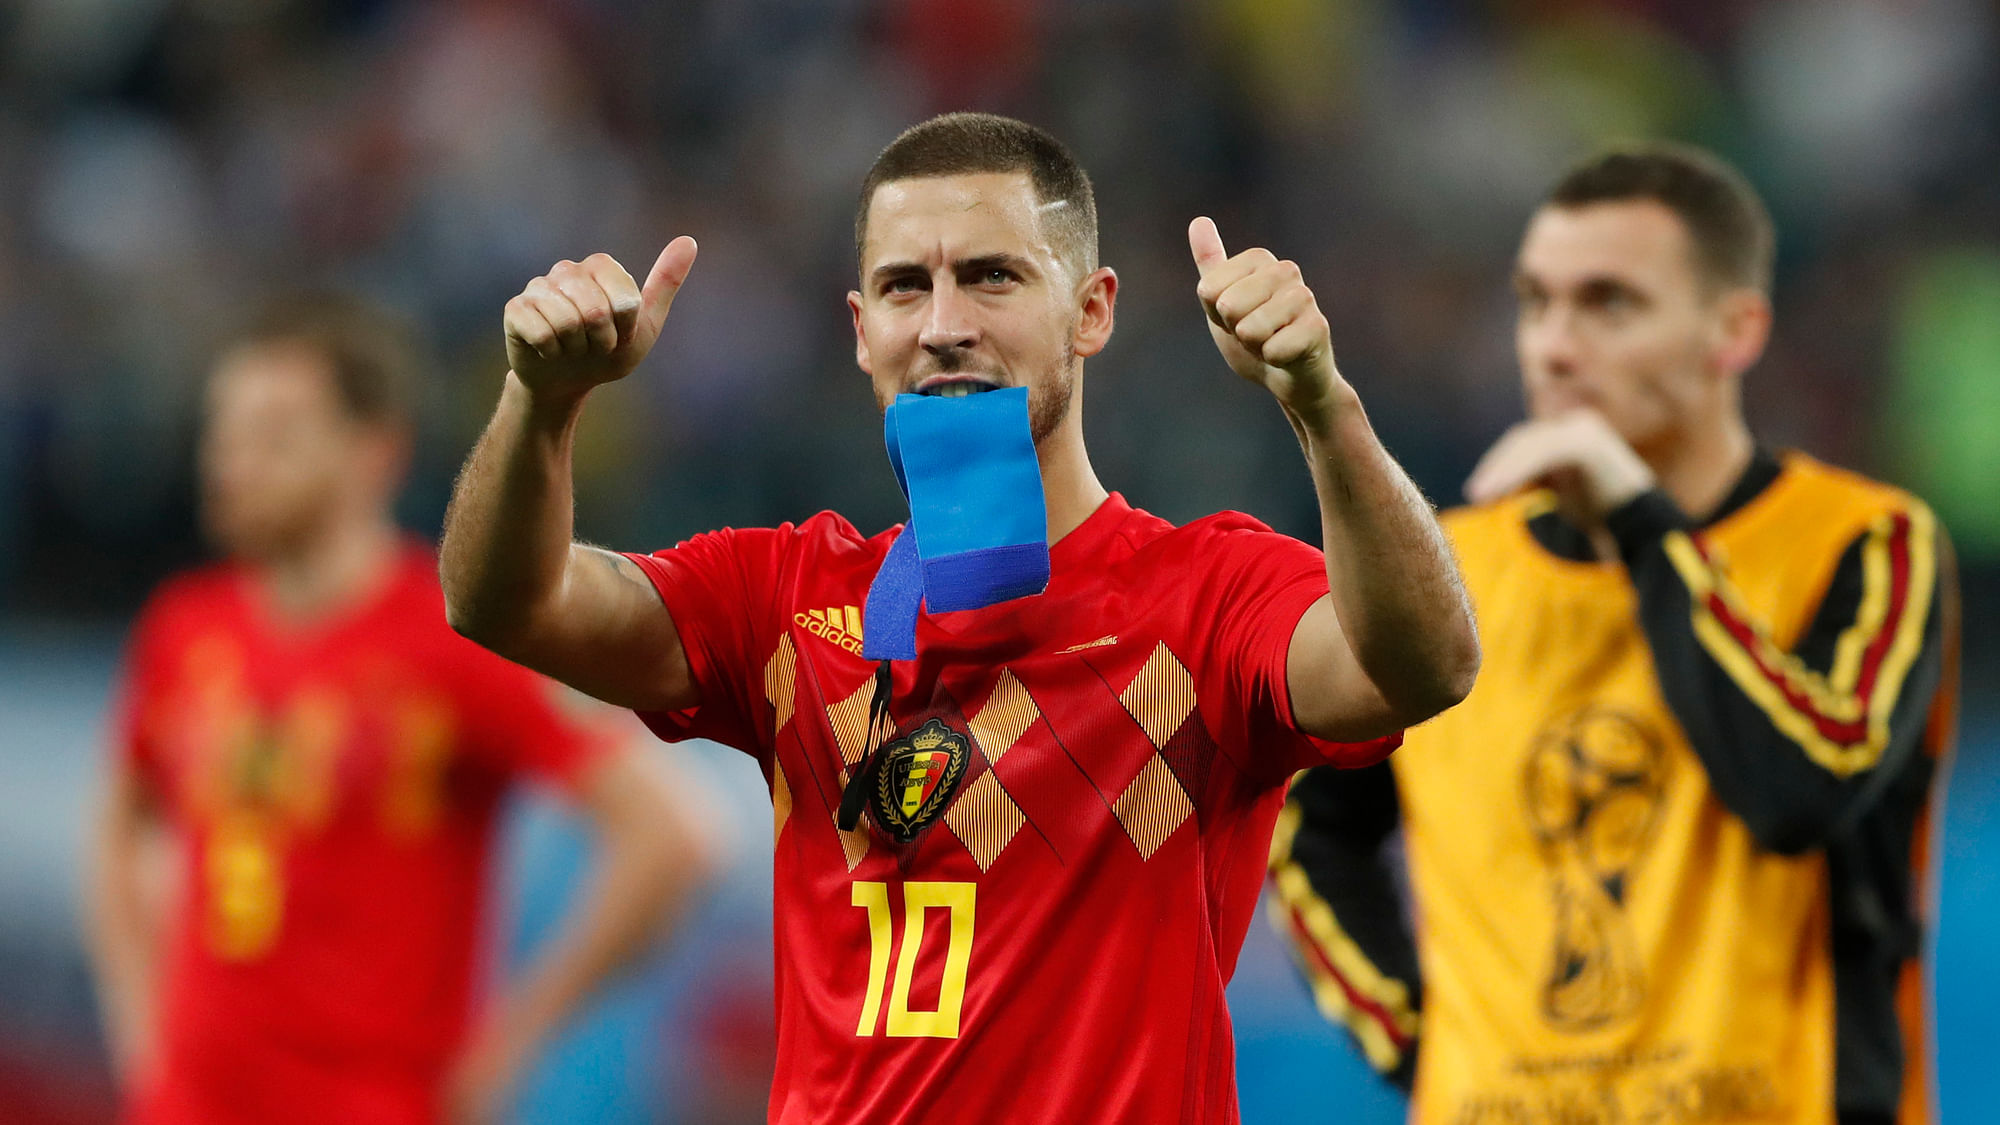 Belgium’s Eden Hazard gestures to supporters after the semifinal match between France and Belgium at the 2018 FIFA World Cup in the St. Petersburg Stadium in, St. Petersburg, Russia, Tuesday, July 10, 2018.&nbsp;